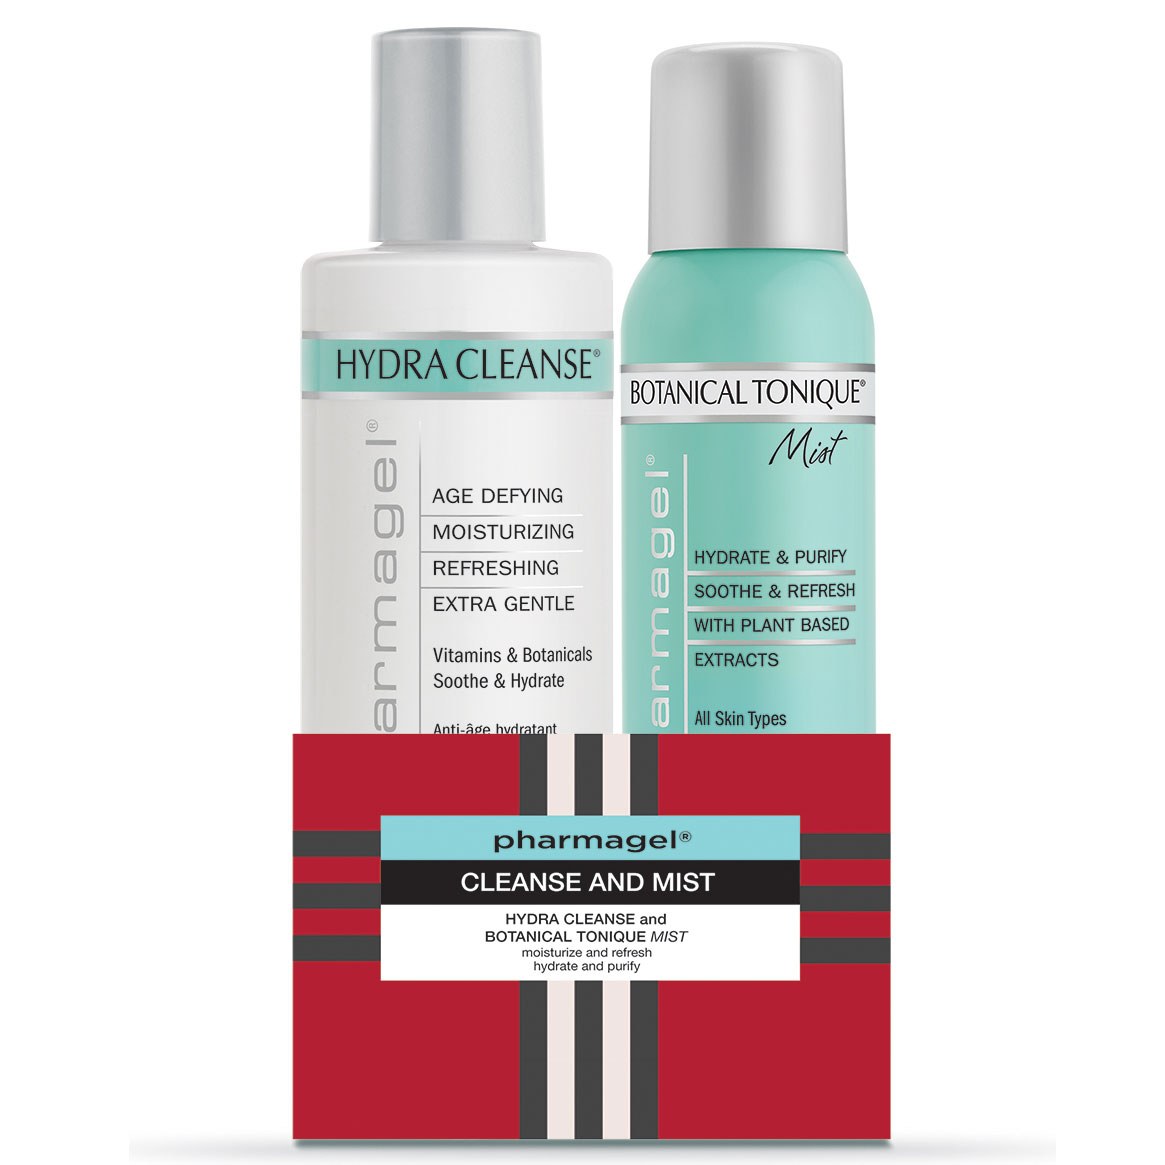 Pharmagel Clean & Mist Duo with Hydra Cleanse and Botanical Tonique Pharmagel Mist Gift Set